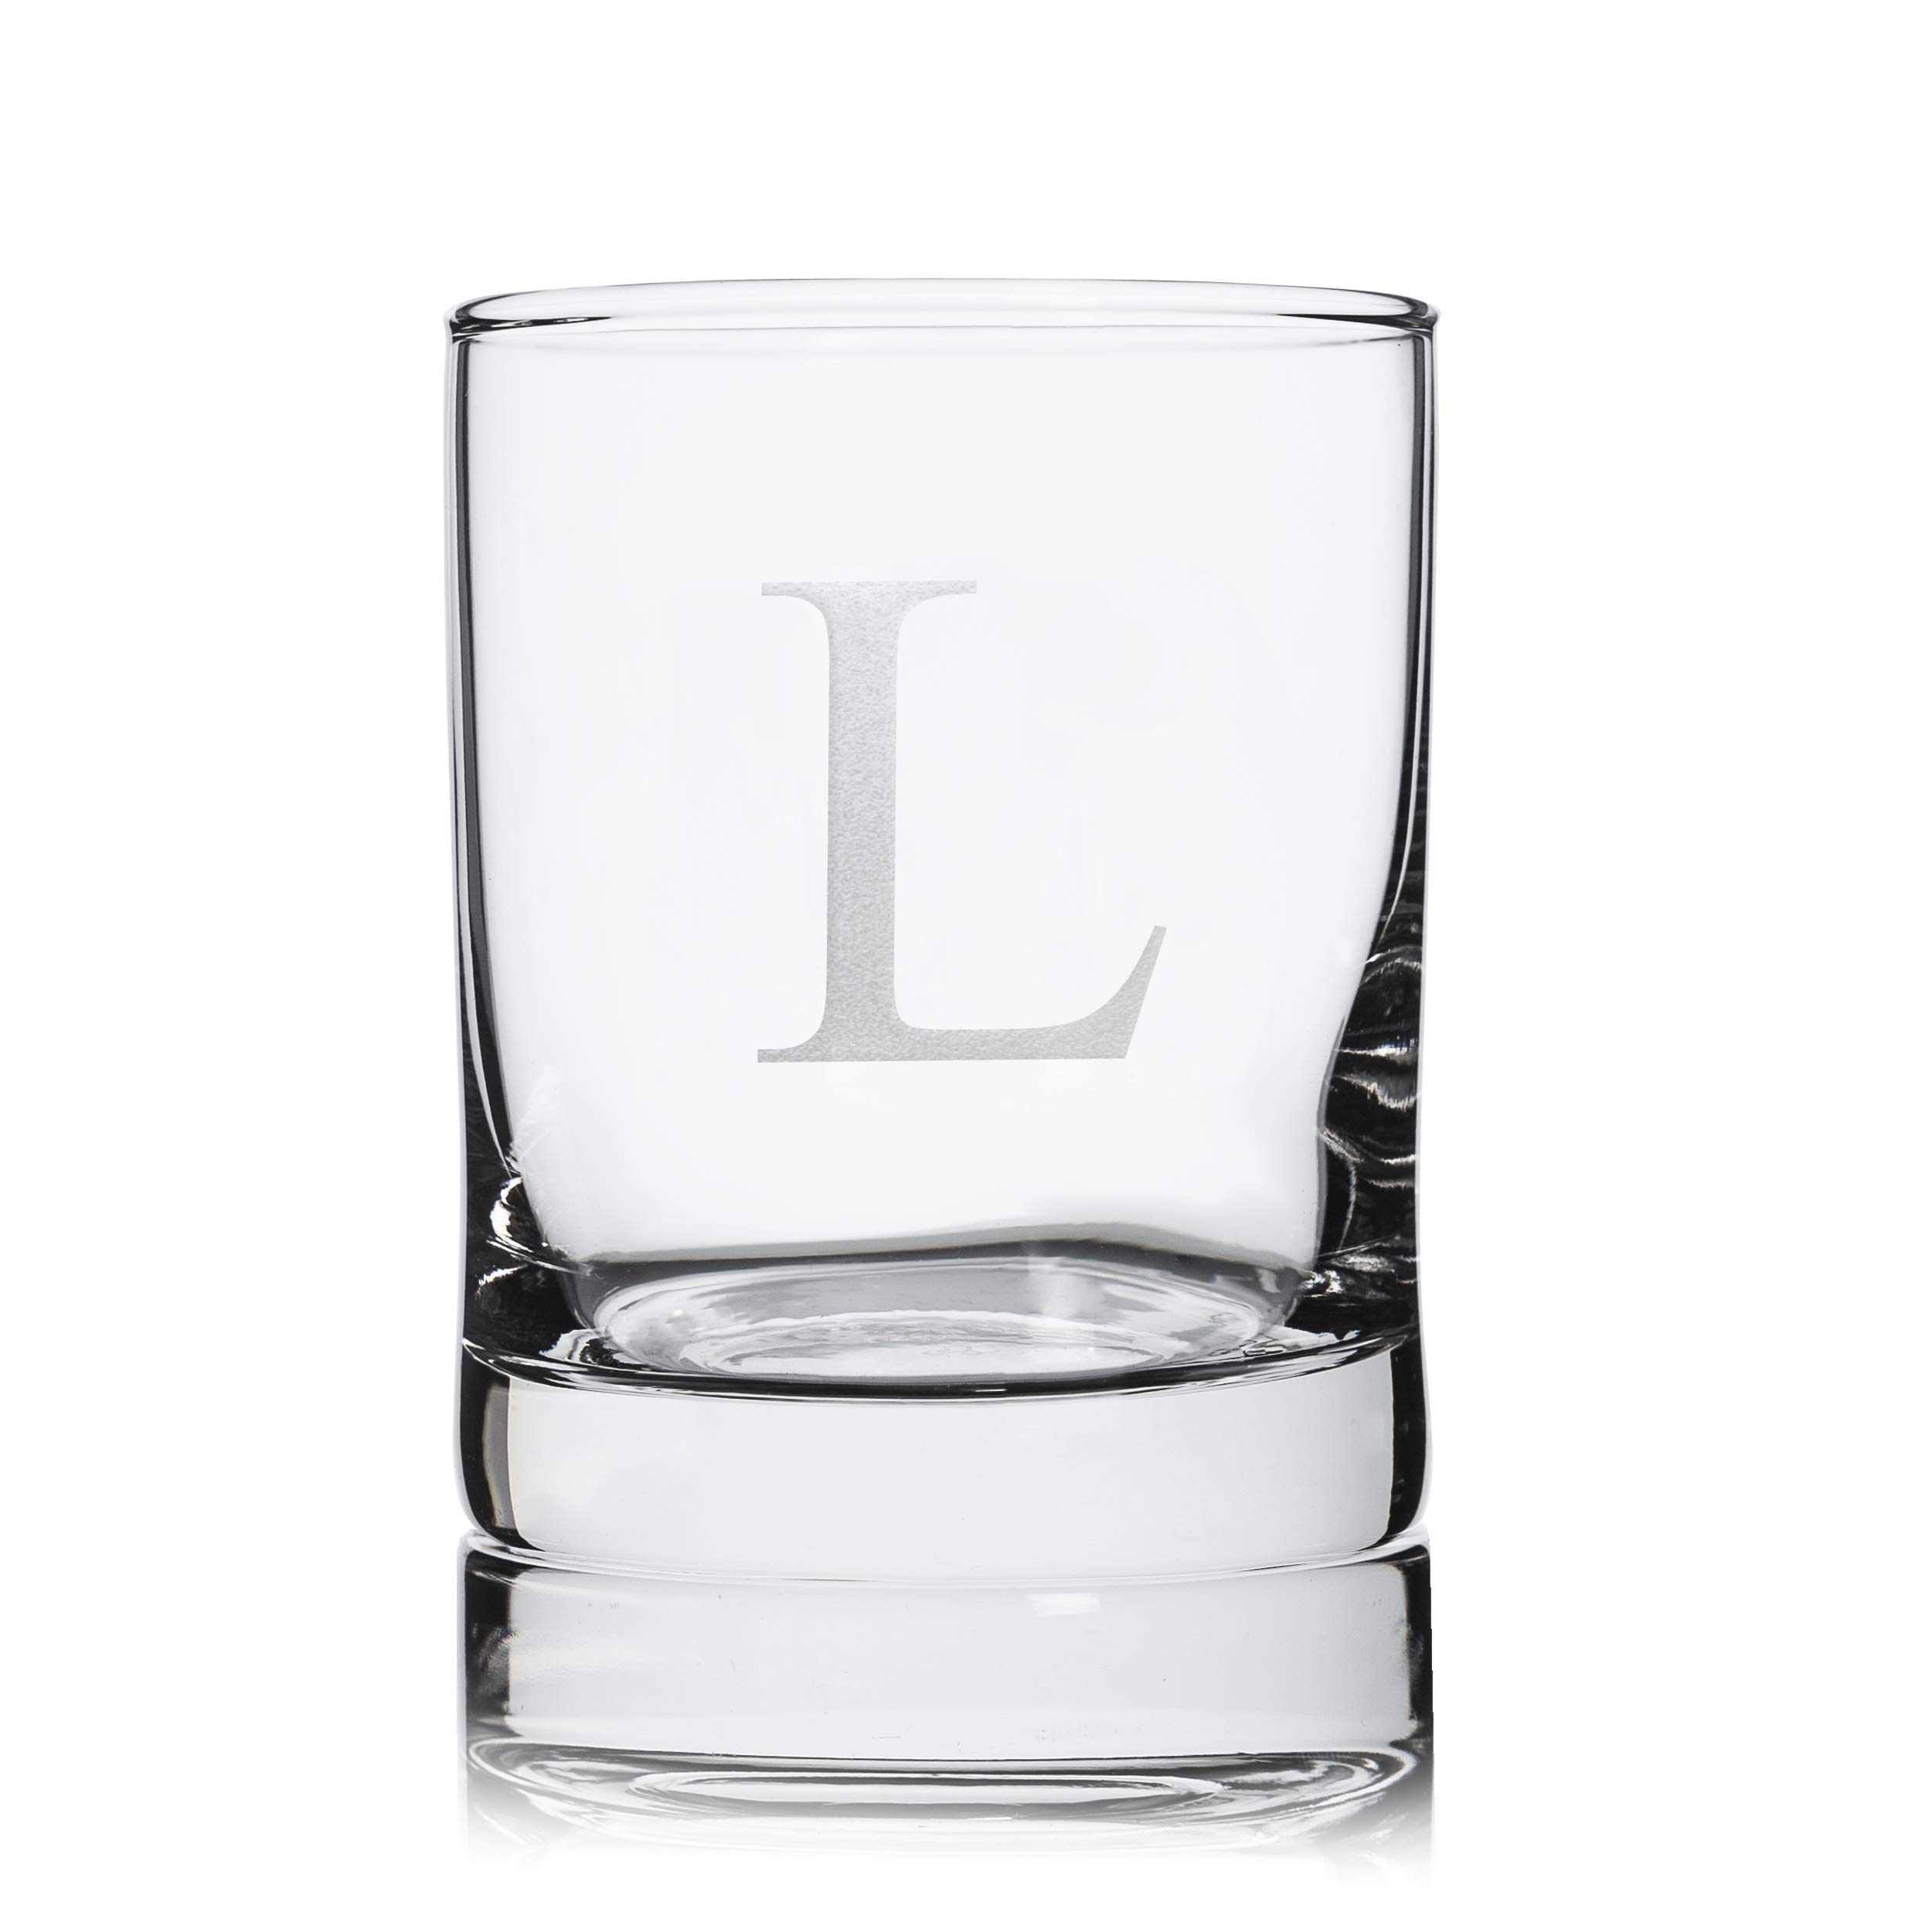 Morning Fog Studios Personalized Scotch Whiskey Glasses Set of 2, Old Fashioned Barware Glassware with Sandblasted Monograms, 12.5 oz Capacity Each (L)